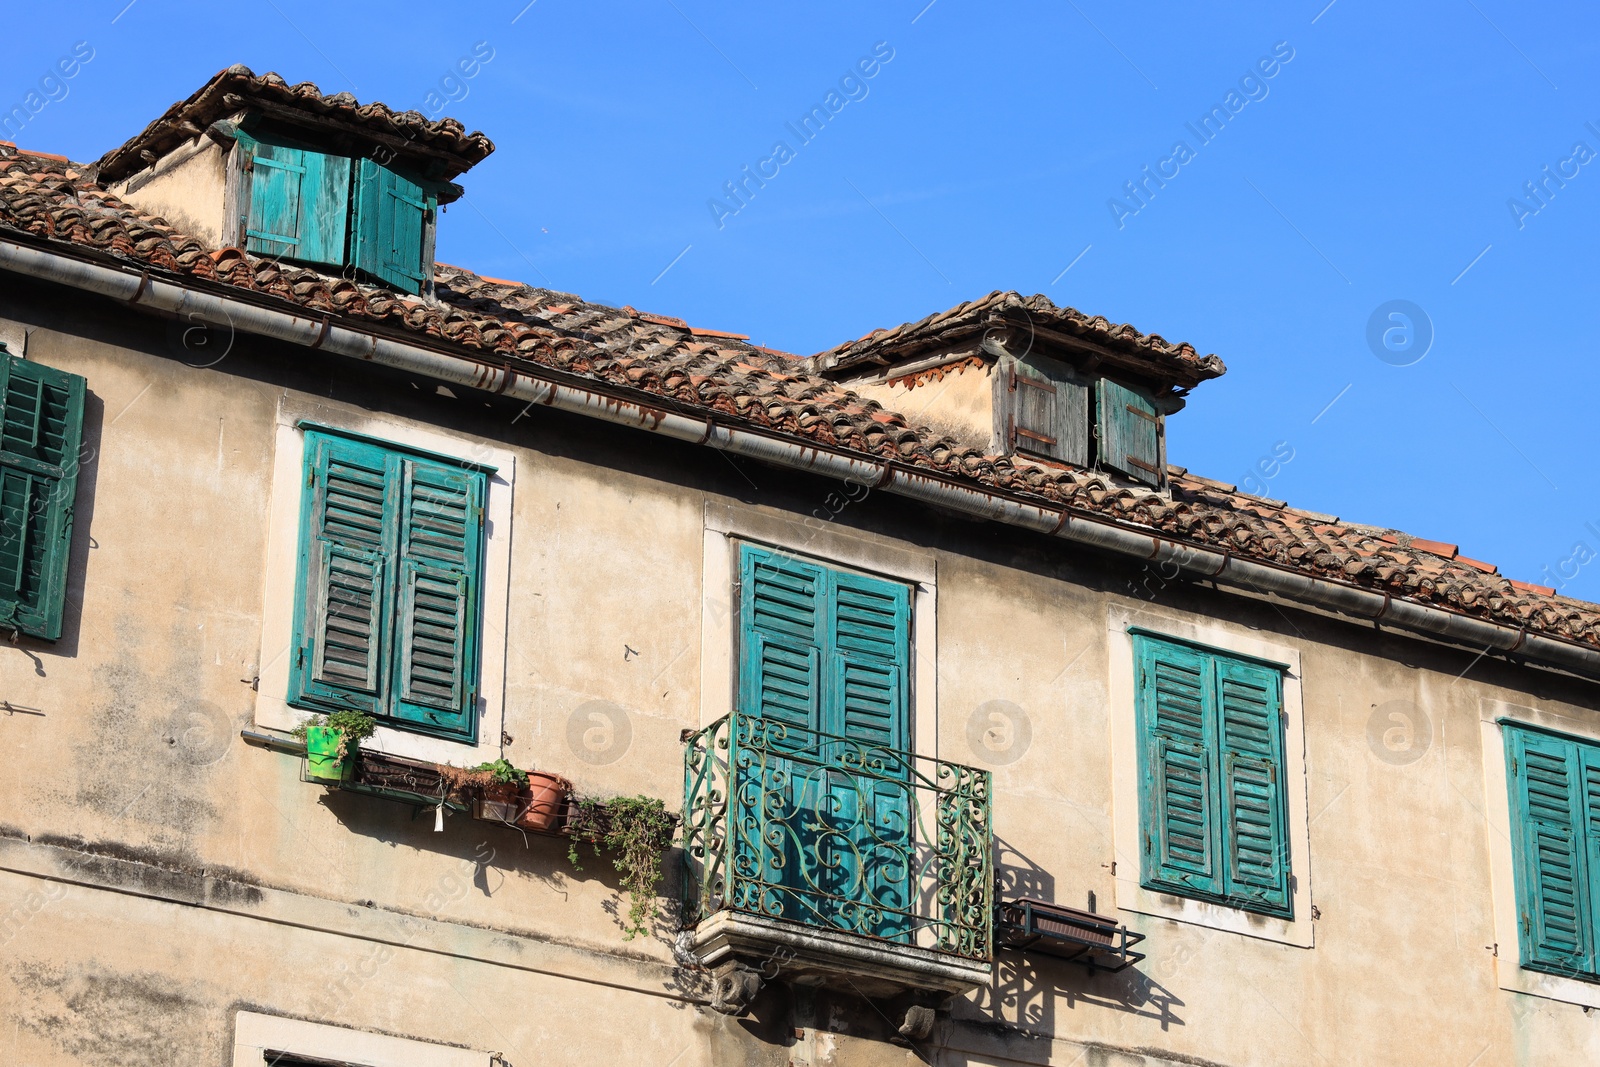 Photo of Old residential building with balcony against light blue sky